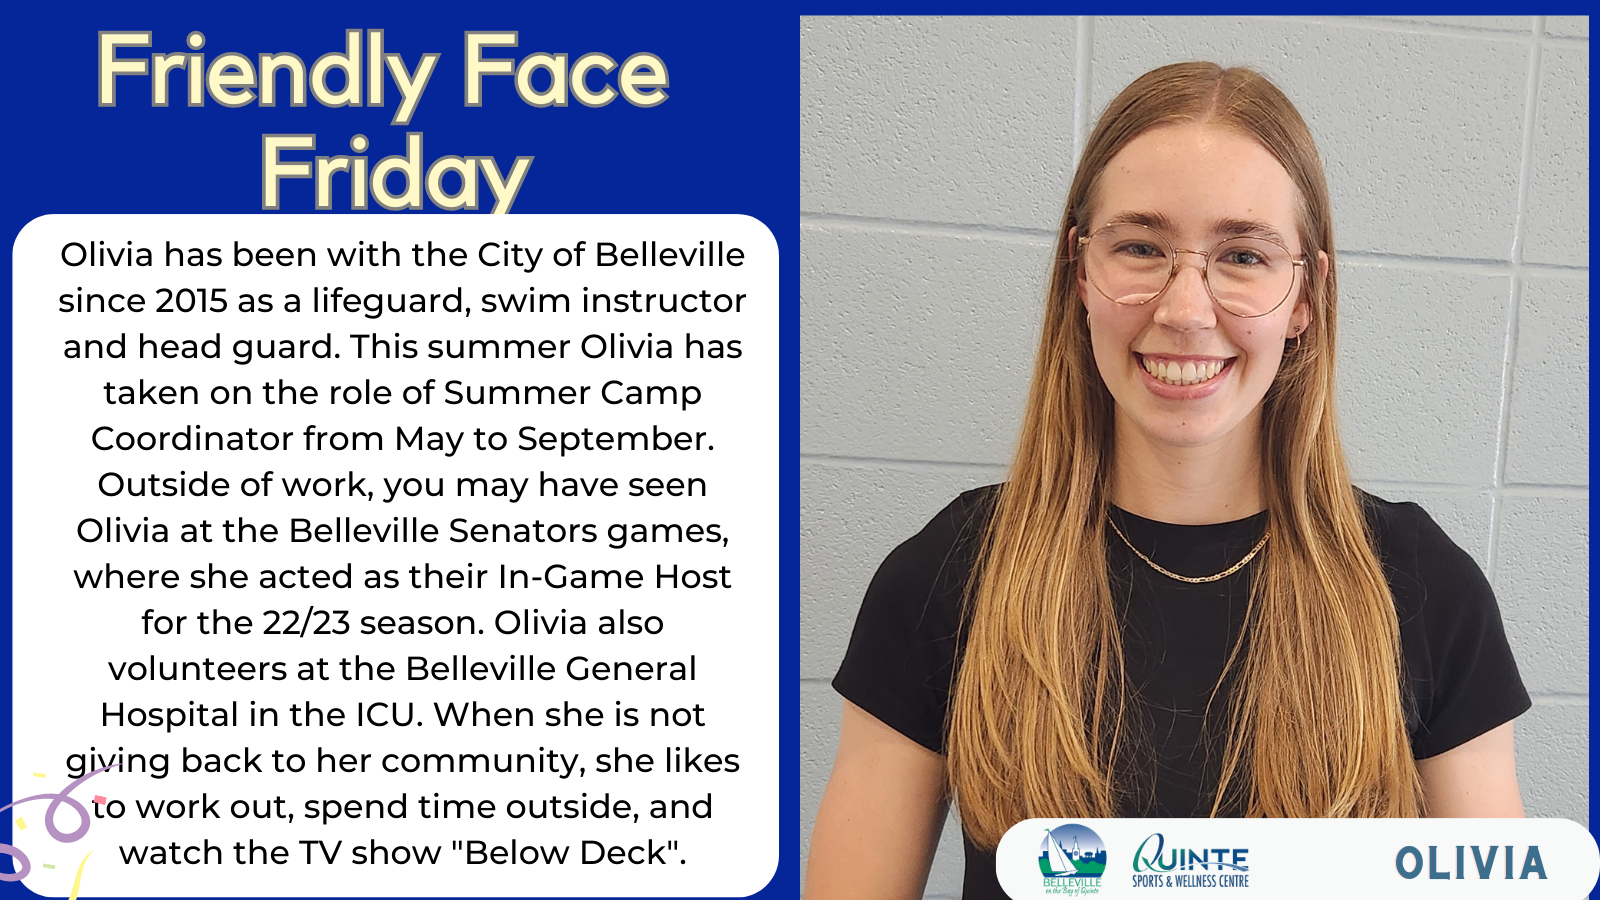 Olivia Friendly Face Friday Olivia has been with the City of Belleville since 2015 as a lifeguard, swim instructor and head guard. This summer Olivia has taken on the role of Summer Camp Coordinator from May to September. Outside of work, you may have seen Olivia at the Belleville Senators games, where she acted as their In-Game Host for the 22/23 season. Olivia also volunteers at the Belleville General Hospital in the ICU. When she is not giving back to her community, she likes to work out, spend time outside, and watch the TV show "Below Deck".